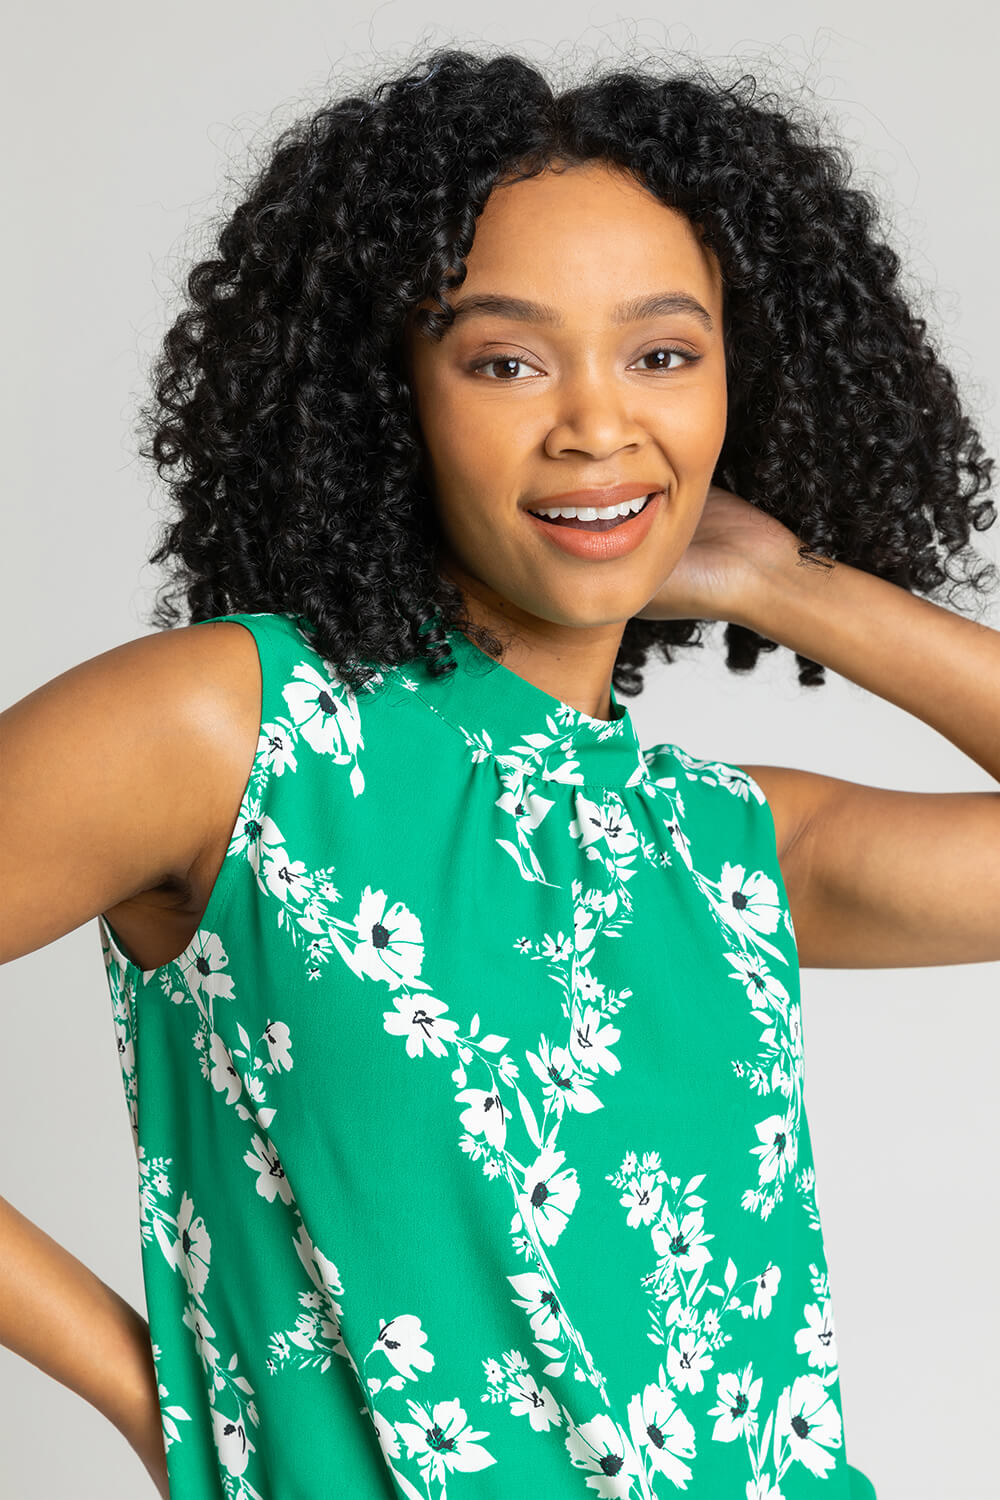 Green Petite Floral Print High Neck Tie Top, Image 4 of 5